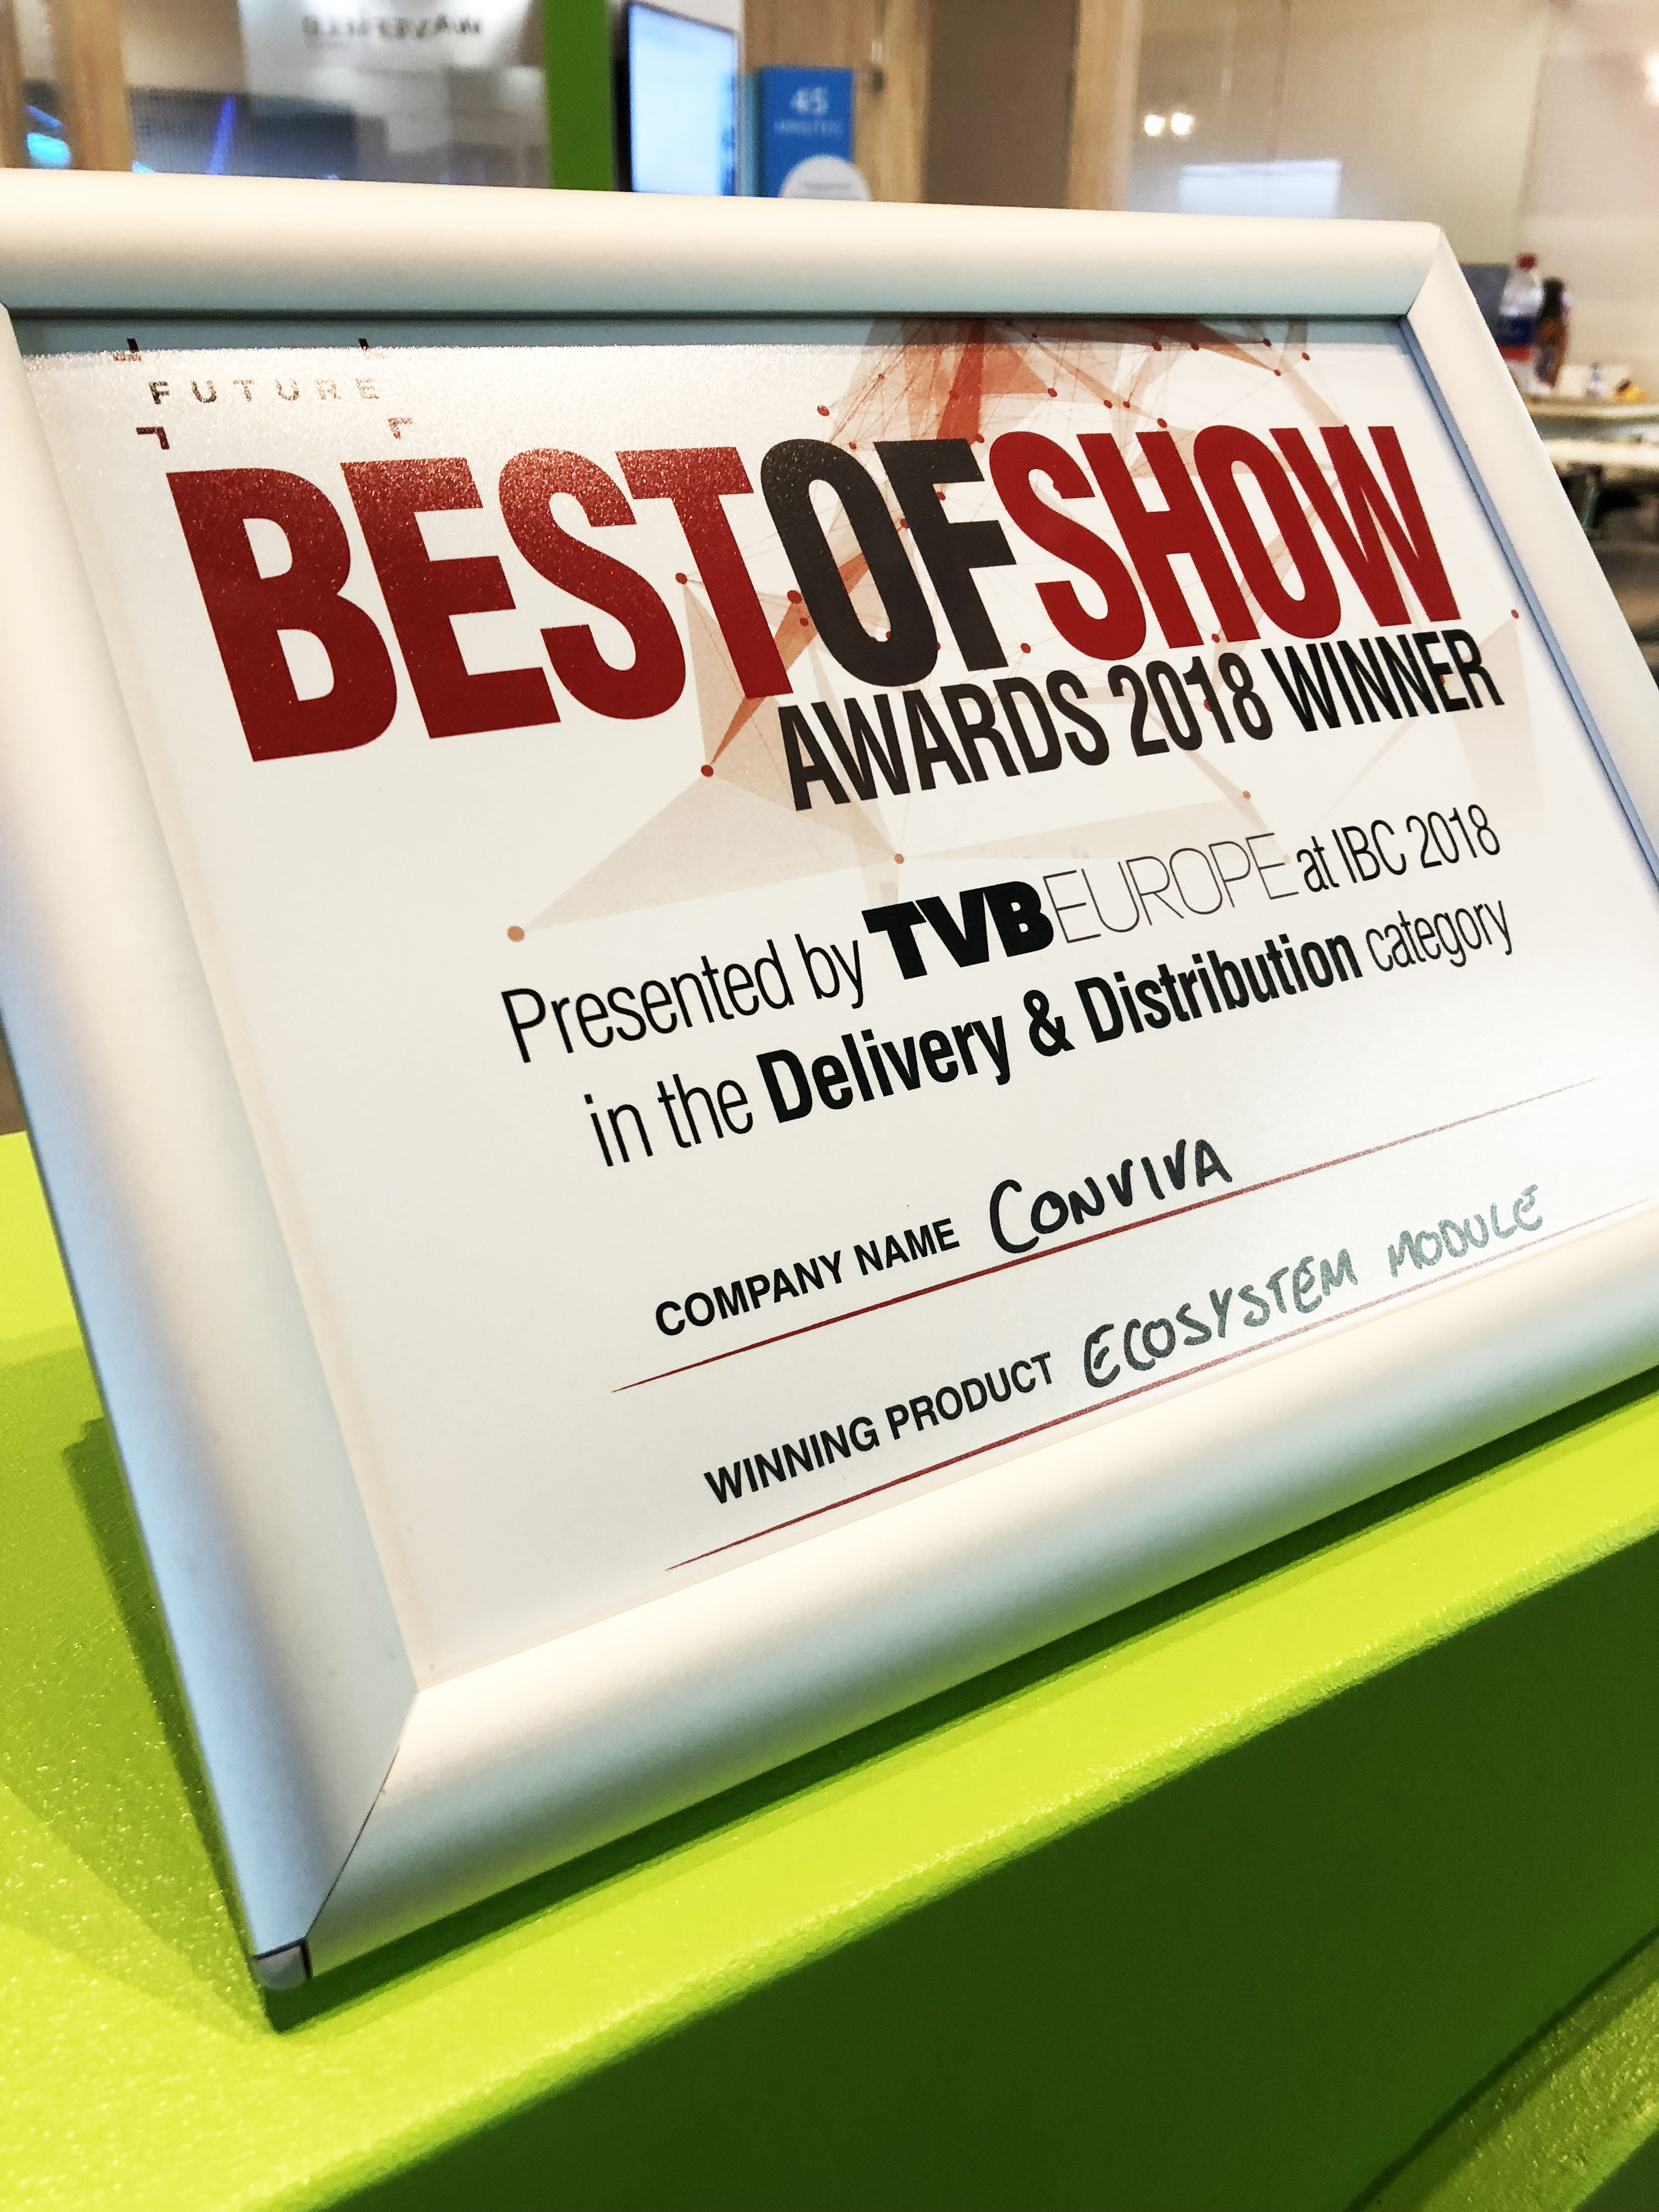 Close up Shot of Conviva's Award "Best of Show" Awards 2018 Presented by TVB Europe at IBC 2018